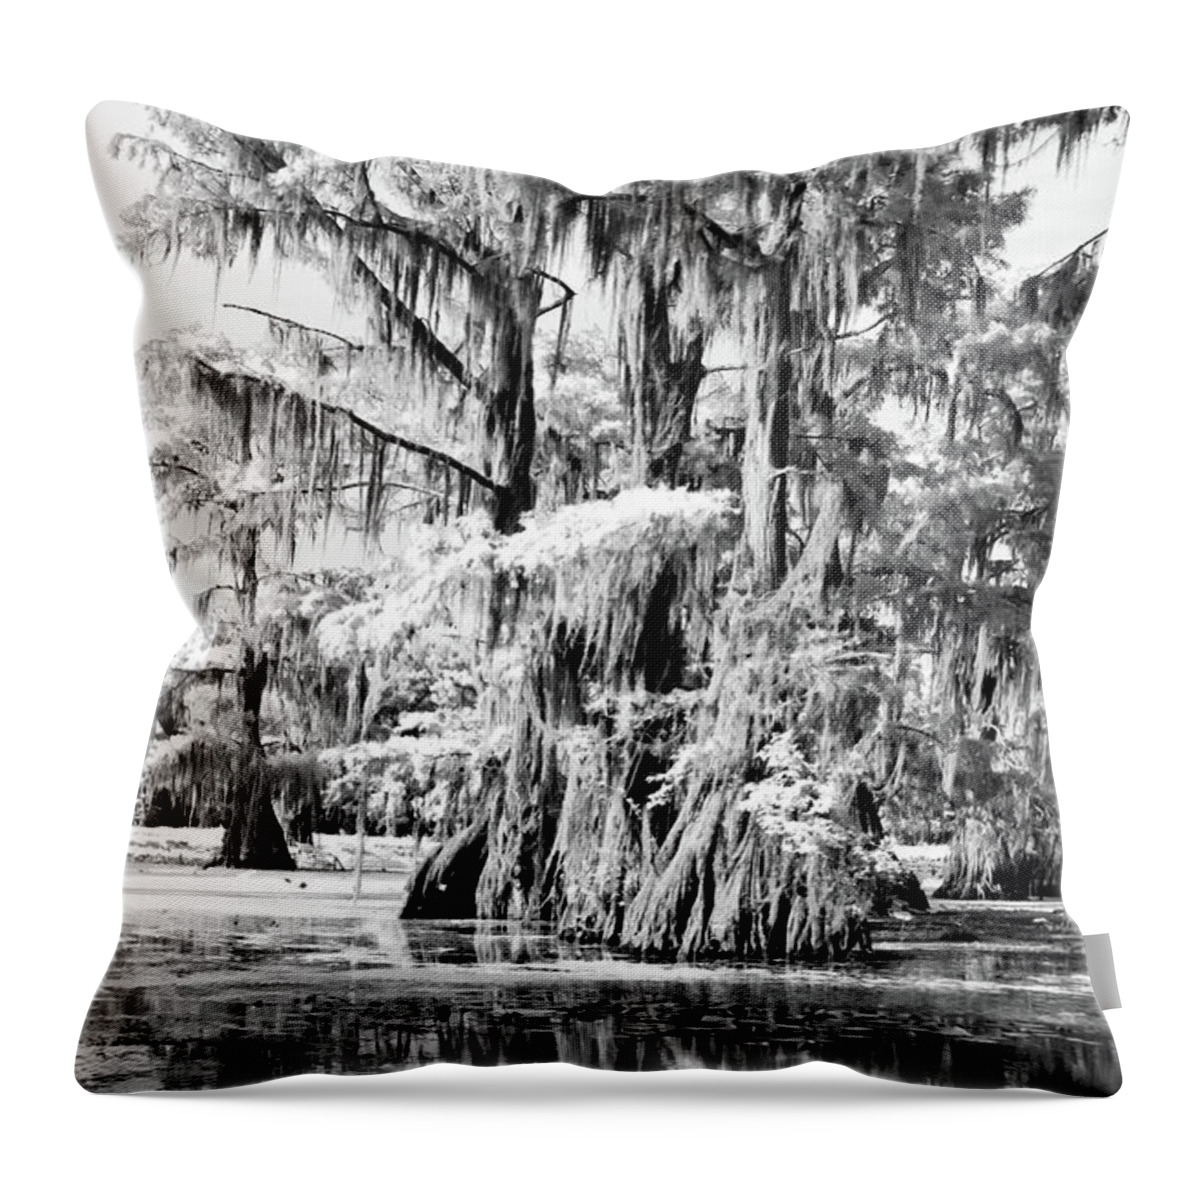 Algae Throw Pillow featuring the photograph Cypress Infrared by Lana Trussell